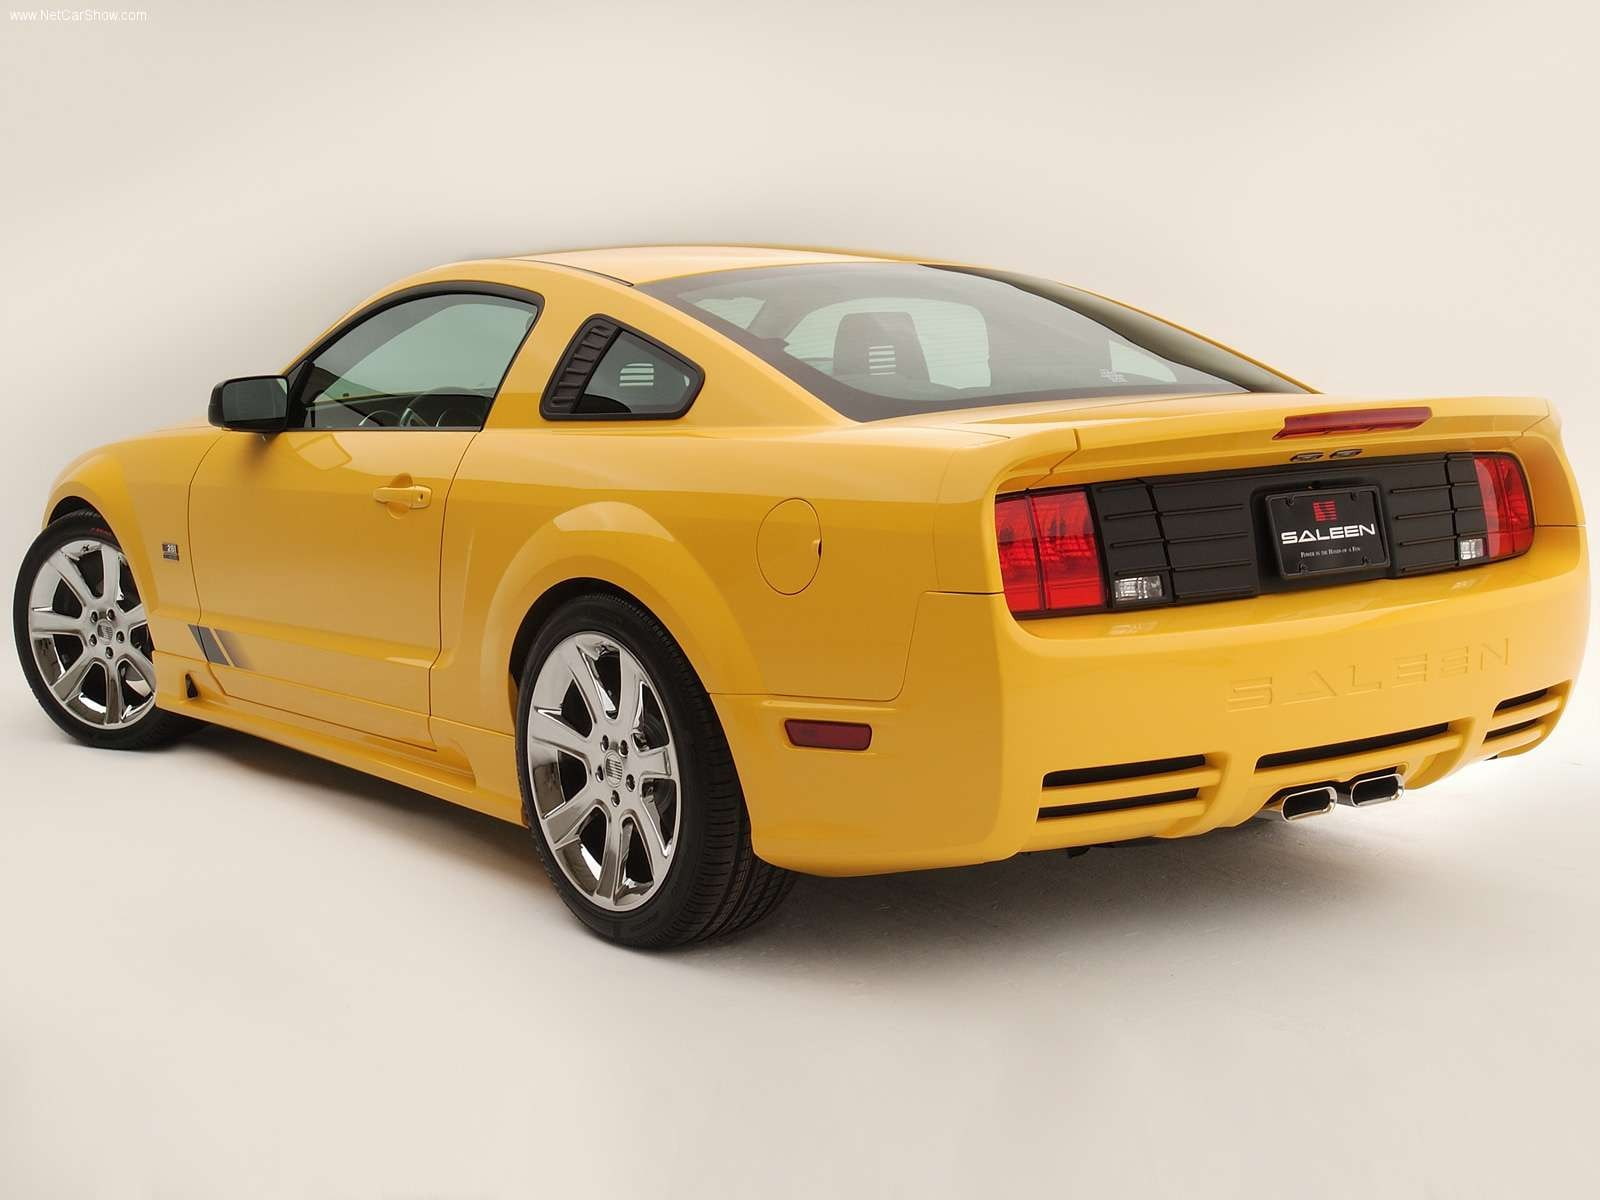 Saleen, car, yellow cars, simple background, vehicle, mode of transportation